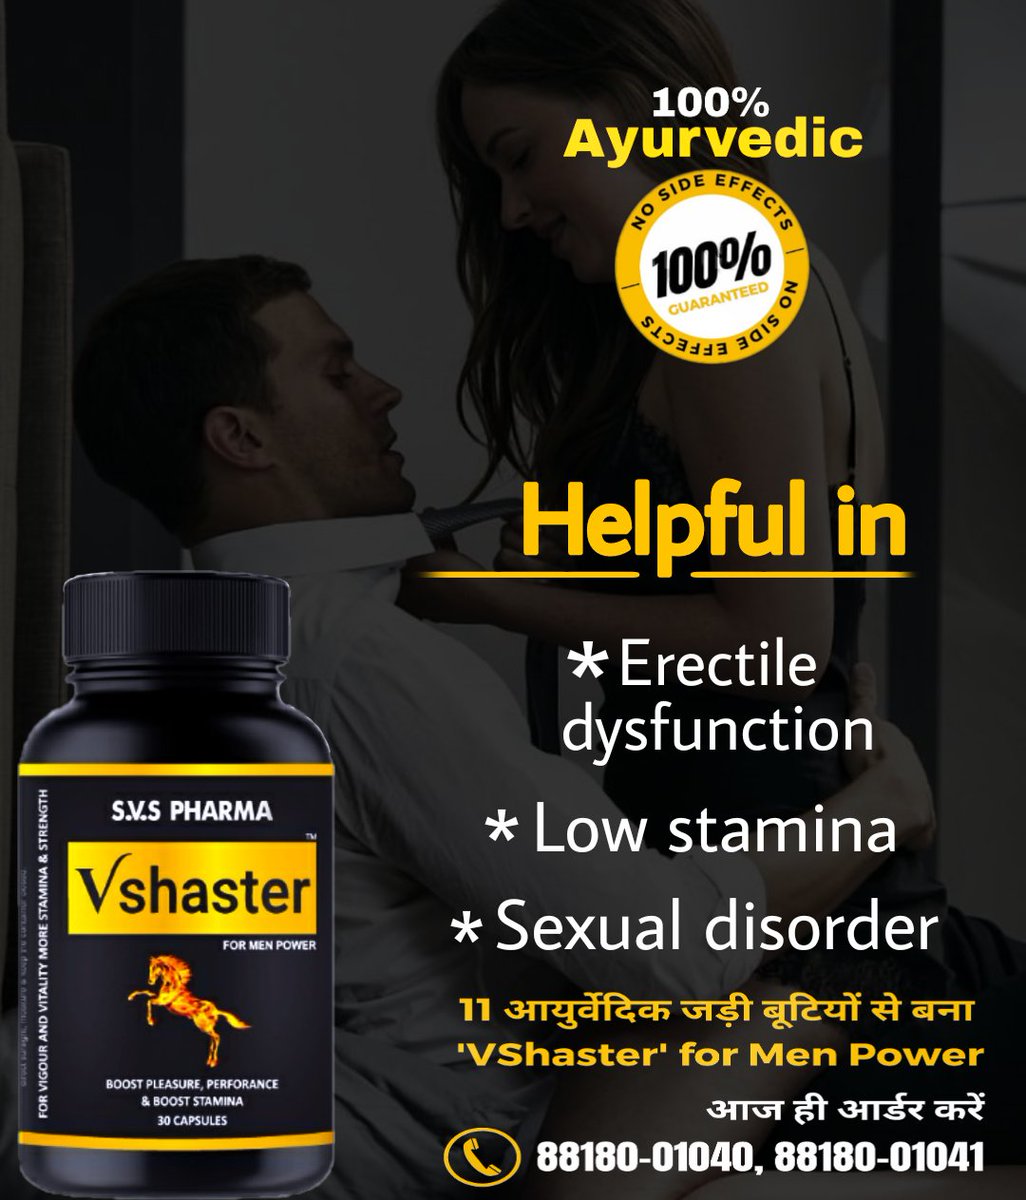 To improve your sexual problem 
Use Vshaster Vshaster 
That helps you to cure permanent your problem.

To order or any Information regarding V-shaster you can call & Whatspp:-

+918818001069
#health 
#sexualproblem
#spermdonor